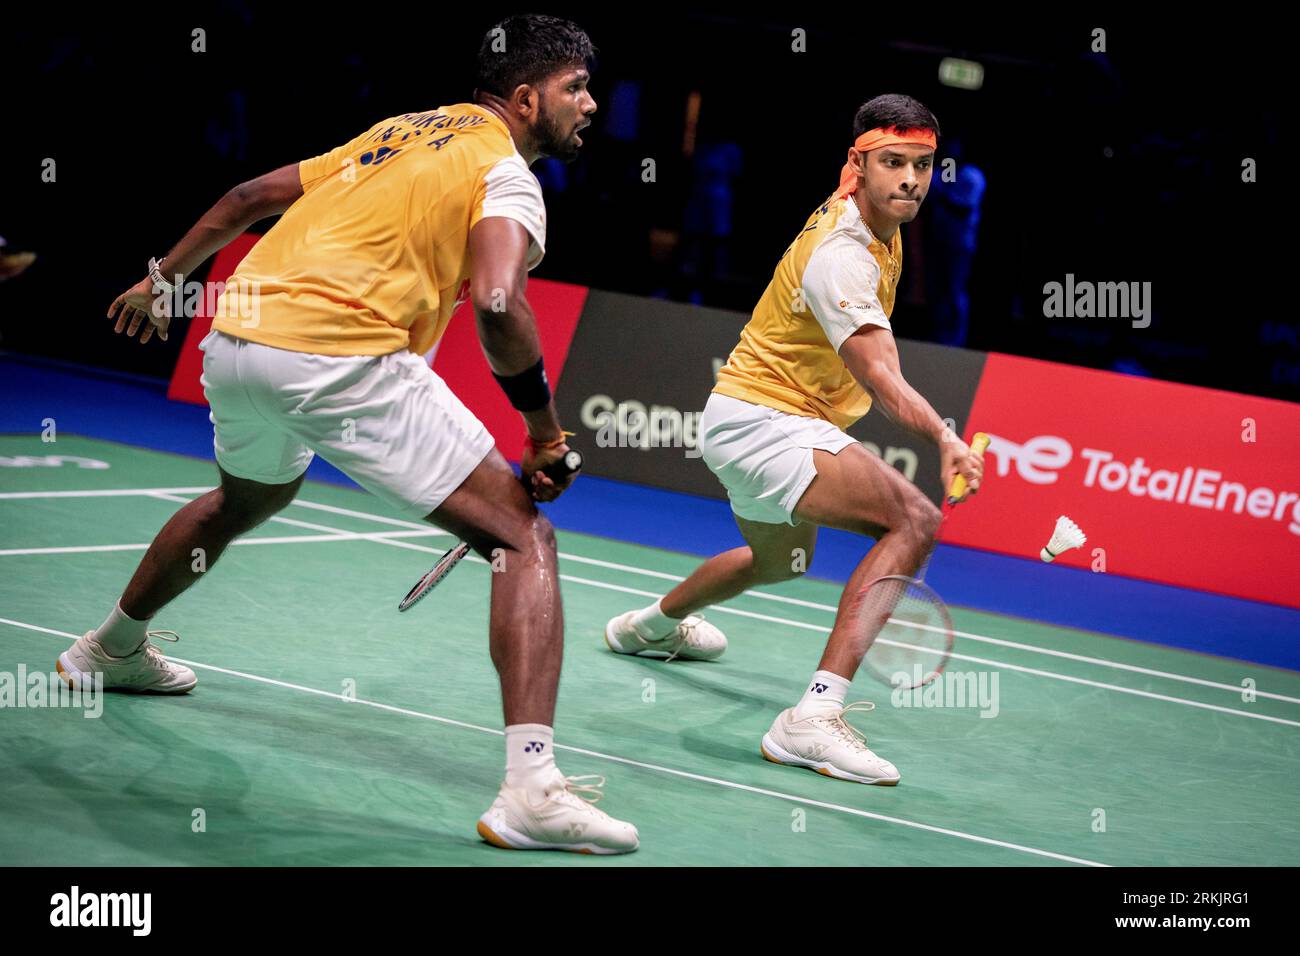 Satwiksairaj Rankireddy and Chirag Shetty of India during their quarter final mens double match against Kim Astrup and Anders Skaarup Rasmussen of Denmark at the BWF World Championship in Royal Arena in